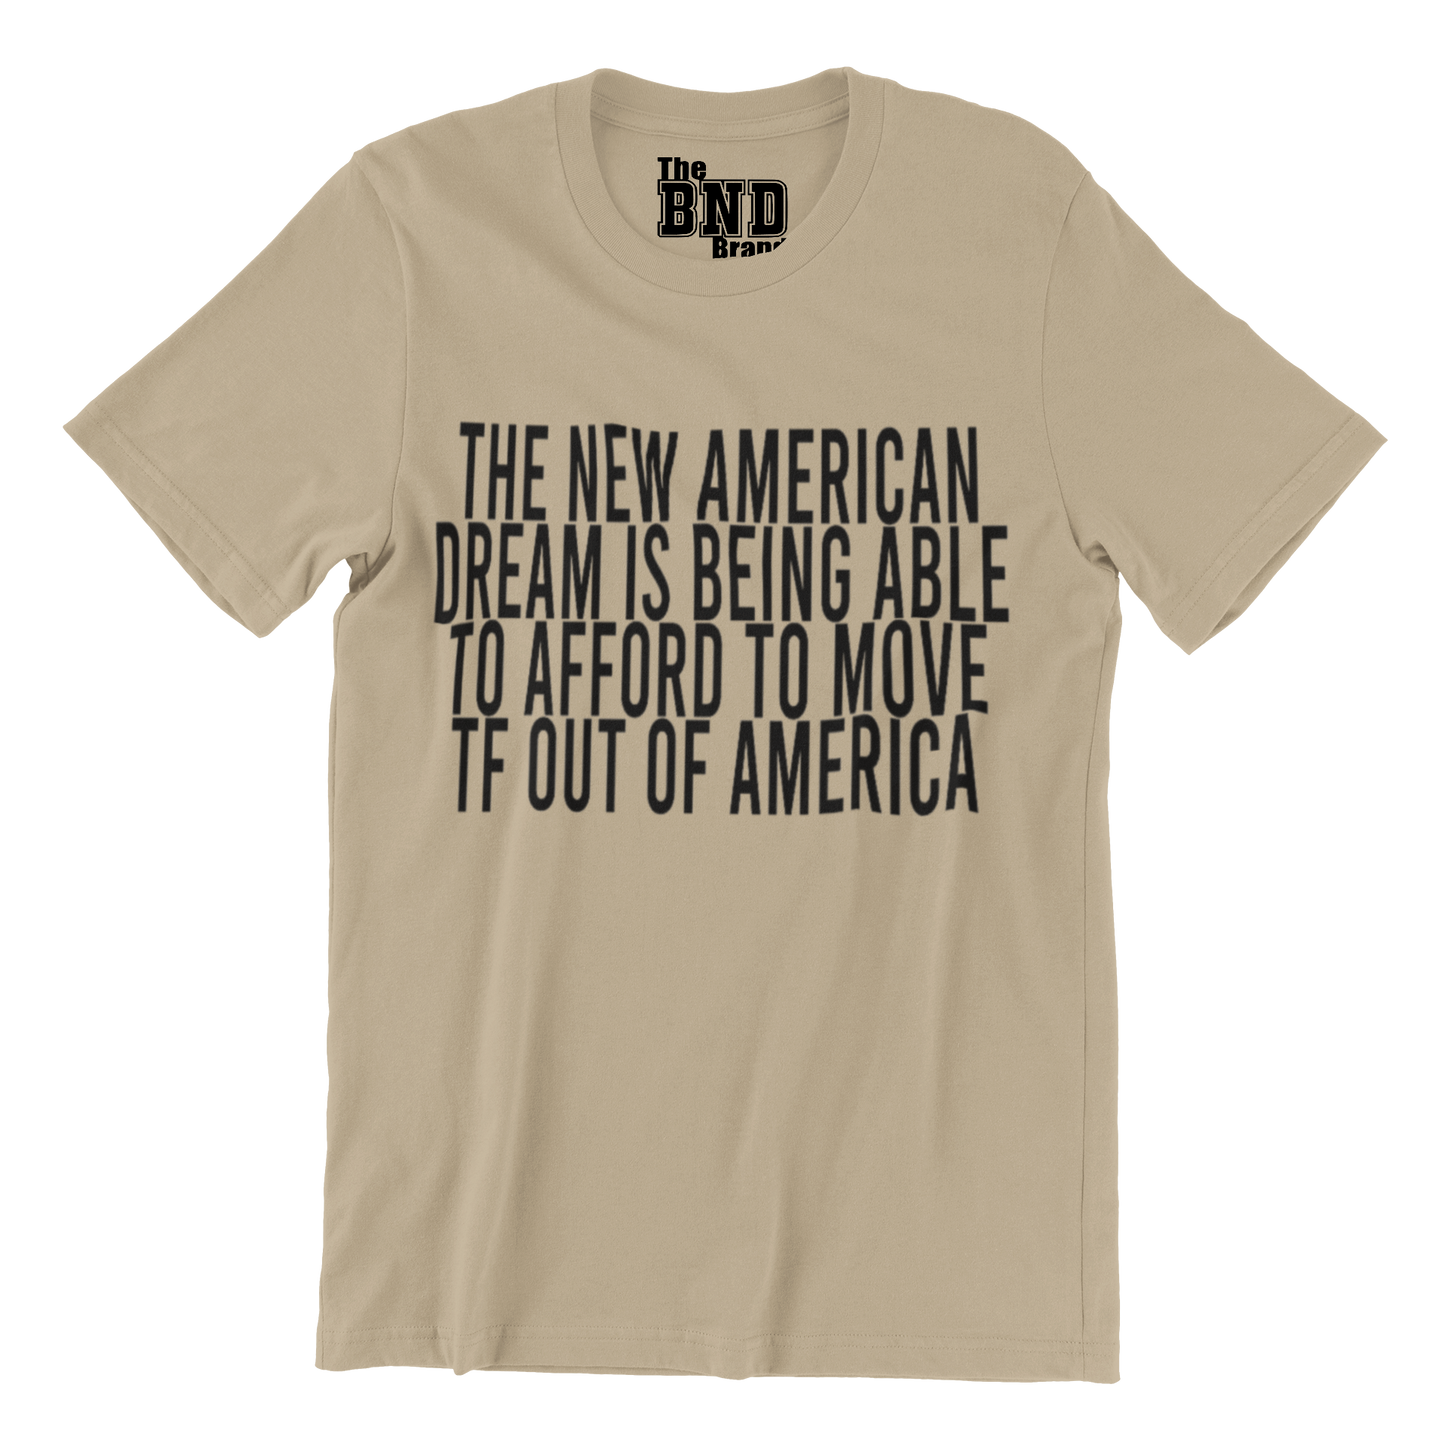 THE NEW AMERICAN DREAM IS BEING ALE TO AFFORD TO MOVE TF OUT OF AMERICA TEE